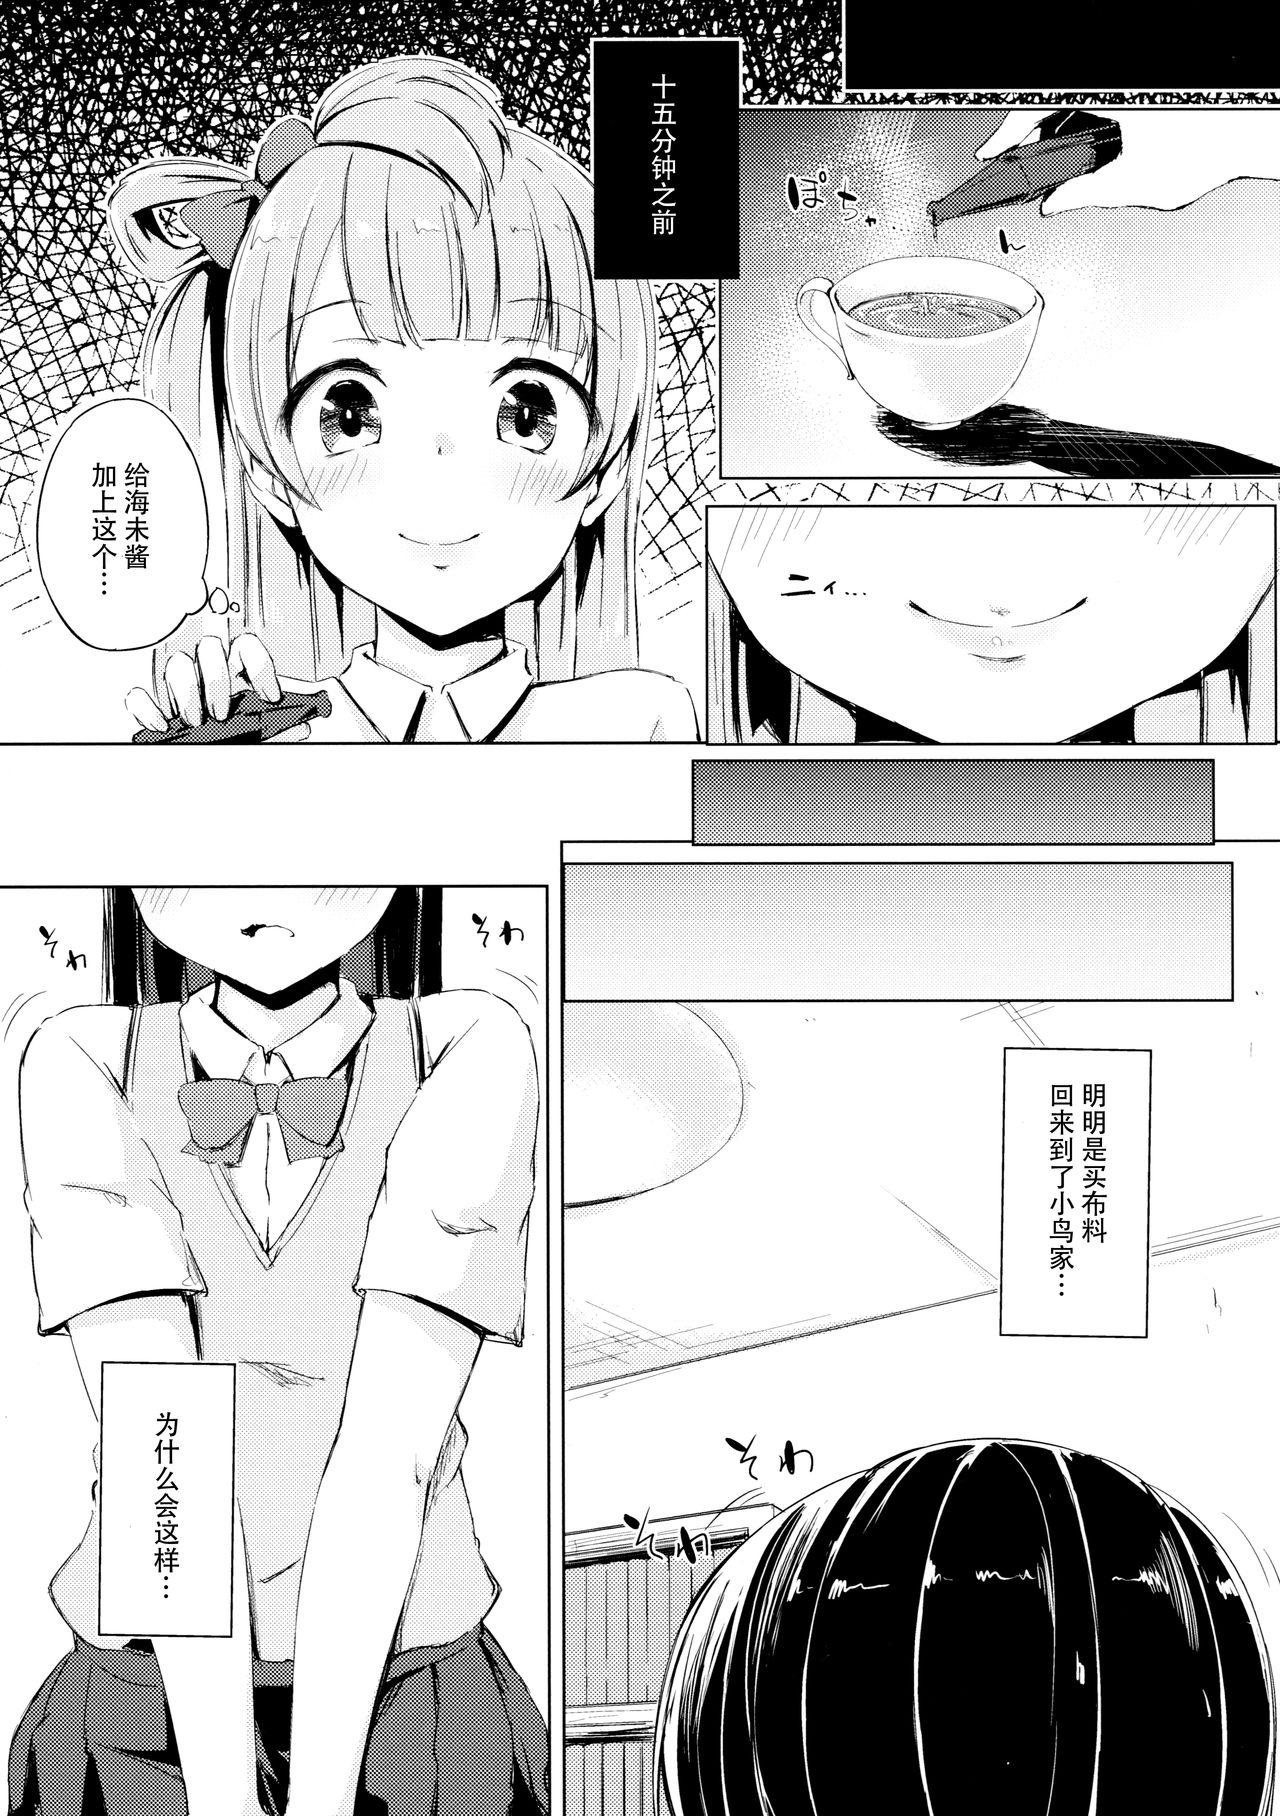 Oral Sex Nightingale Tea Time - Love live Naked - Page 4